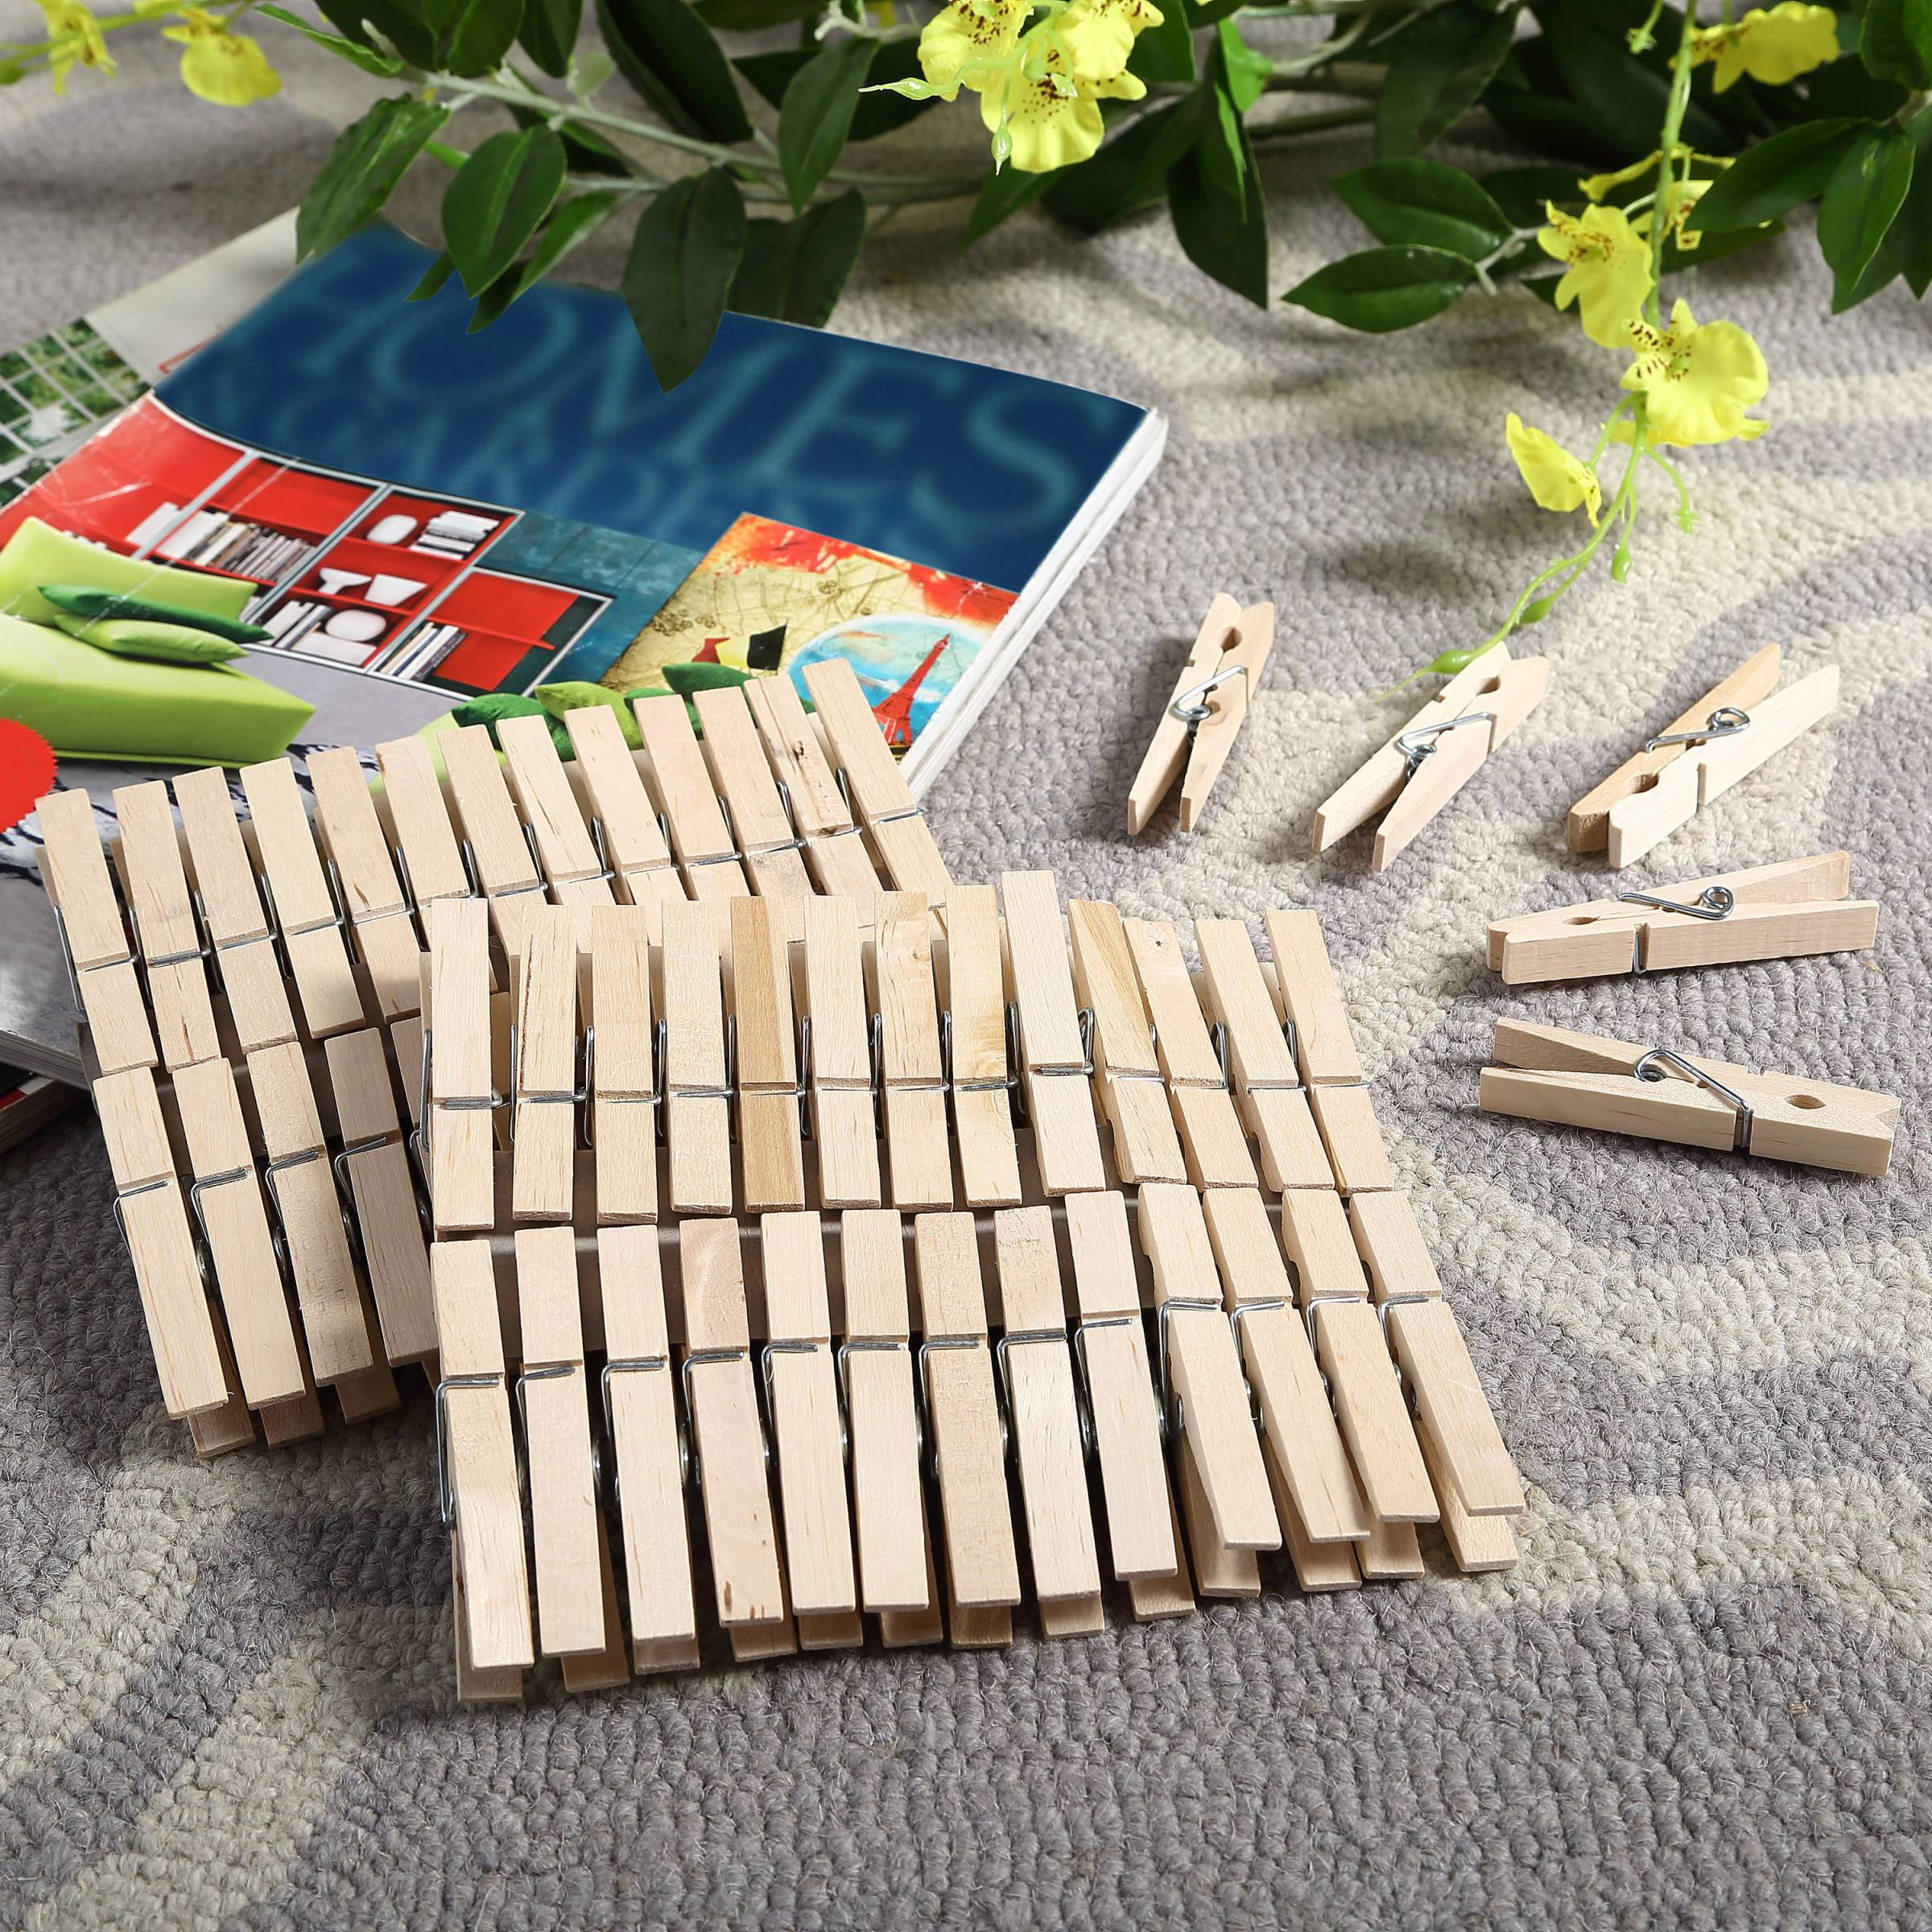 FINGOOO 1.4-inches Length Mini Wooden Clothespins,100 Pcs for Baby Clothes Pins, Clip Photo Holders